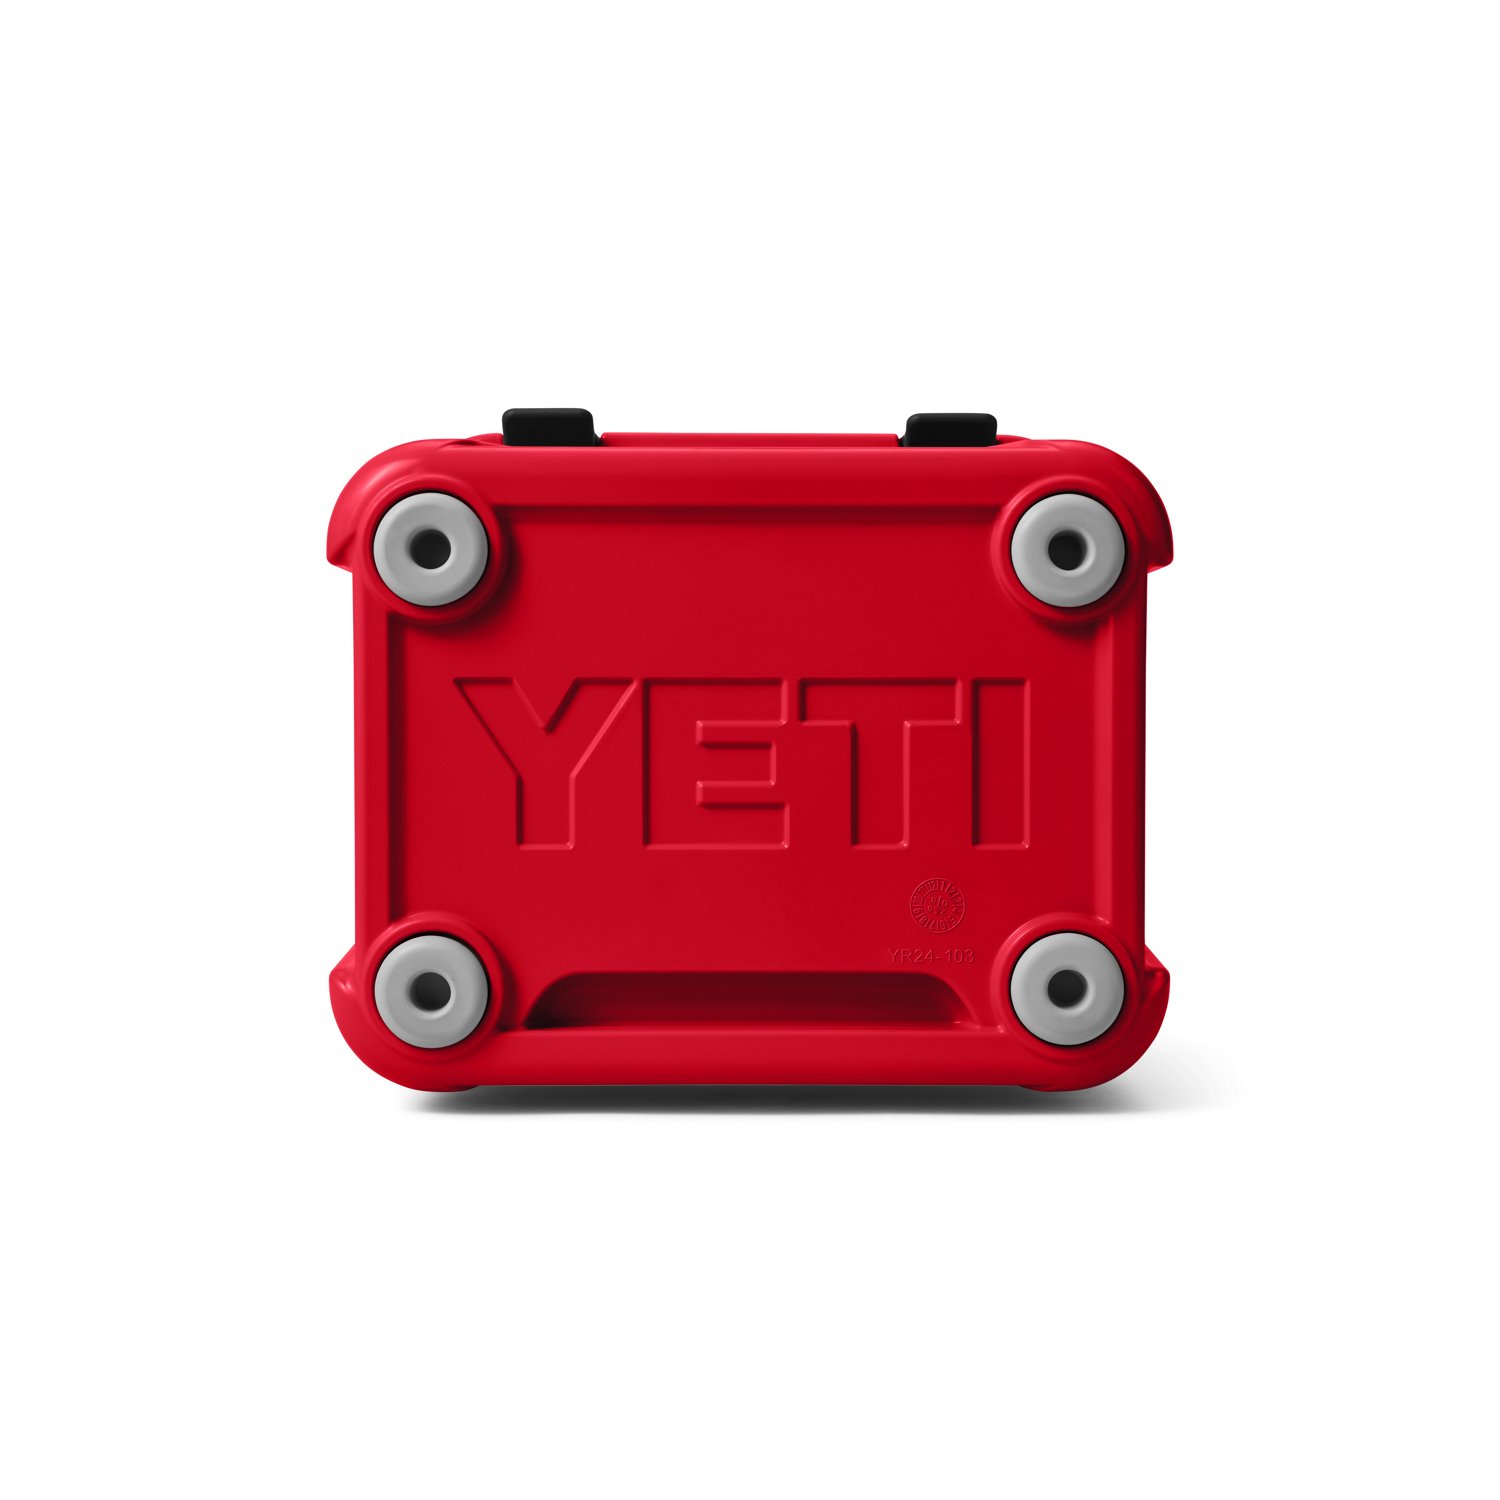 https://academy.scene7.com/is/image/academy//coolers/yeti-roadie-24-hard-cooler-10022350000-red/5413230d7d2a400e9aa1bfe9b16ffec7?$pdp-mobile-gallery-ng$